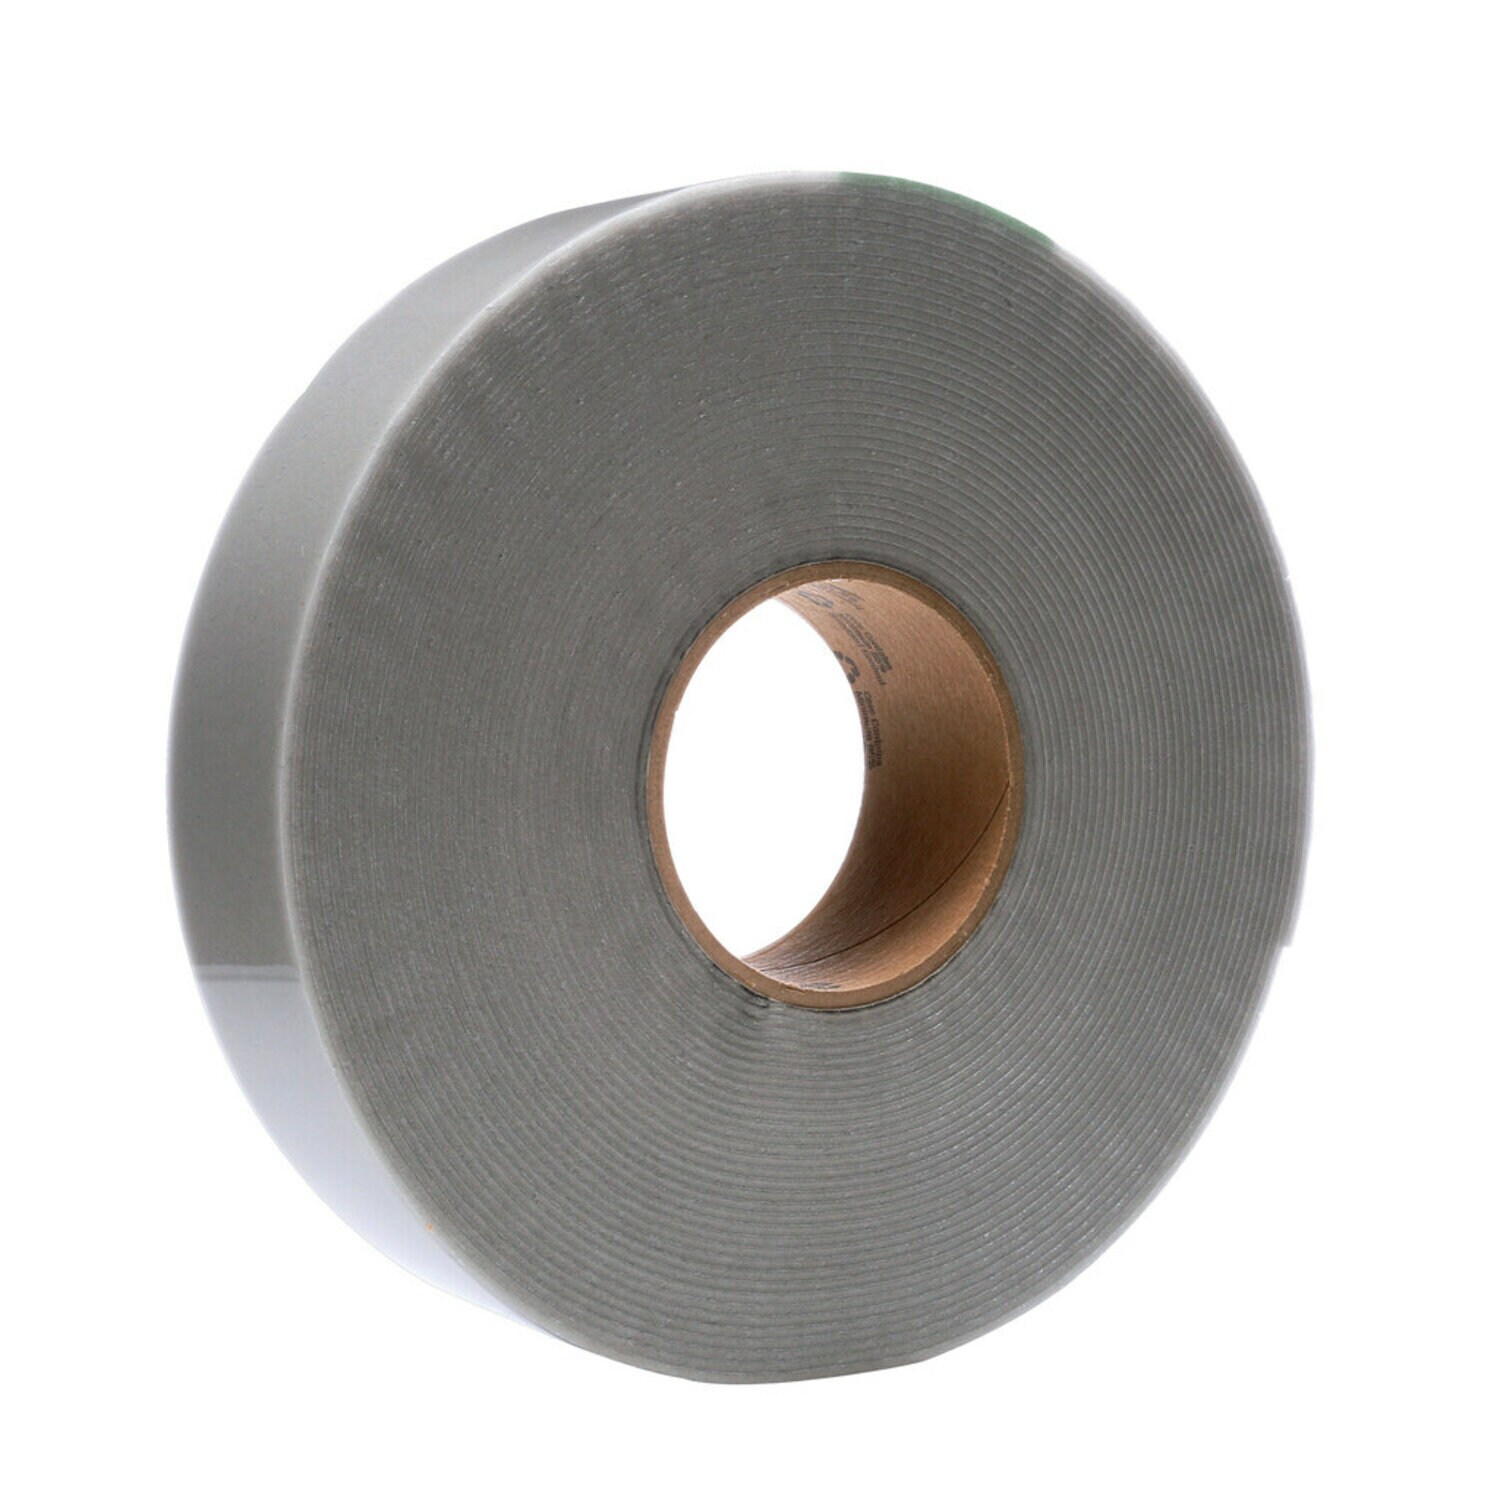 7100009407 - 3M Extreme Sealing Tape 4412G, Gray, 4 in x 18 yd, 2 rolls per case